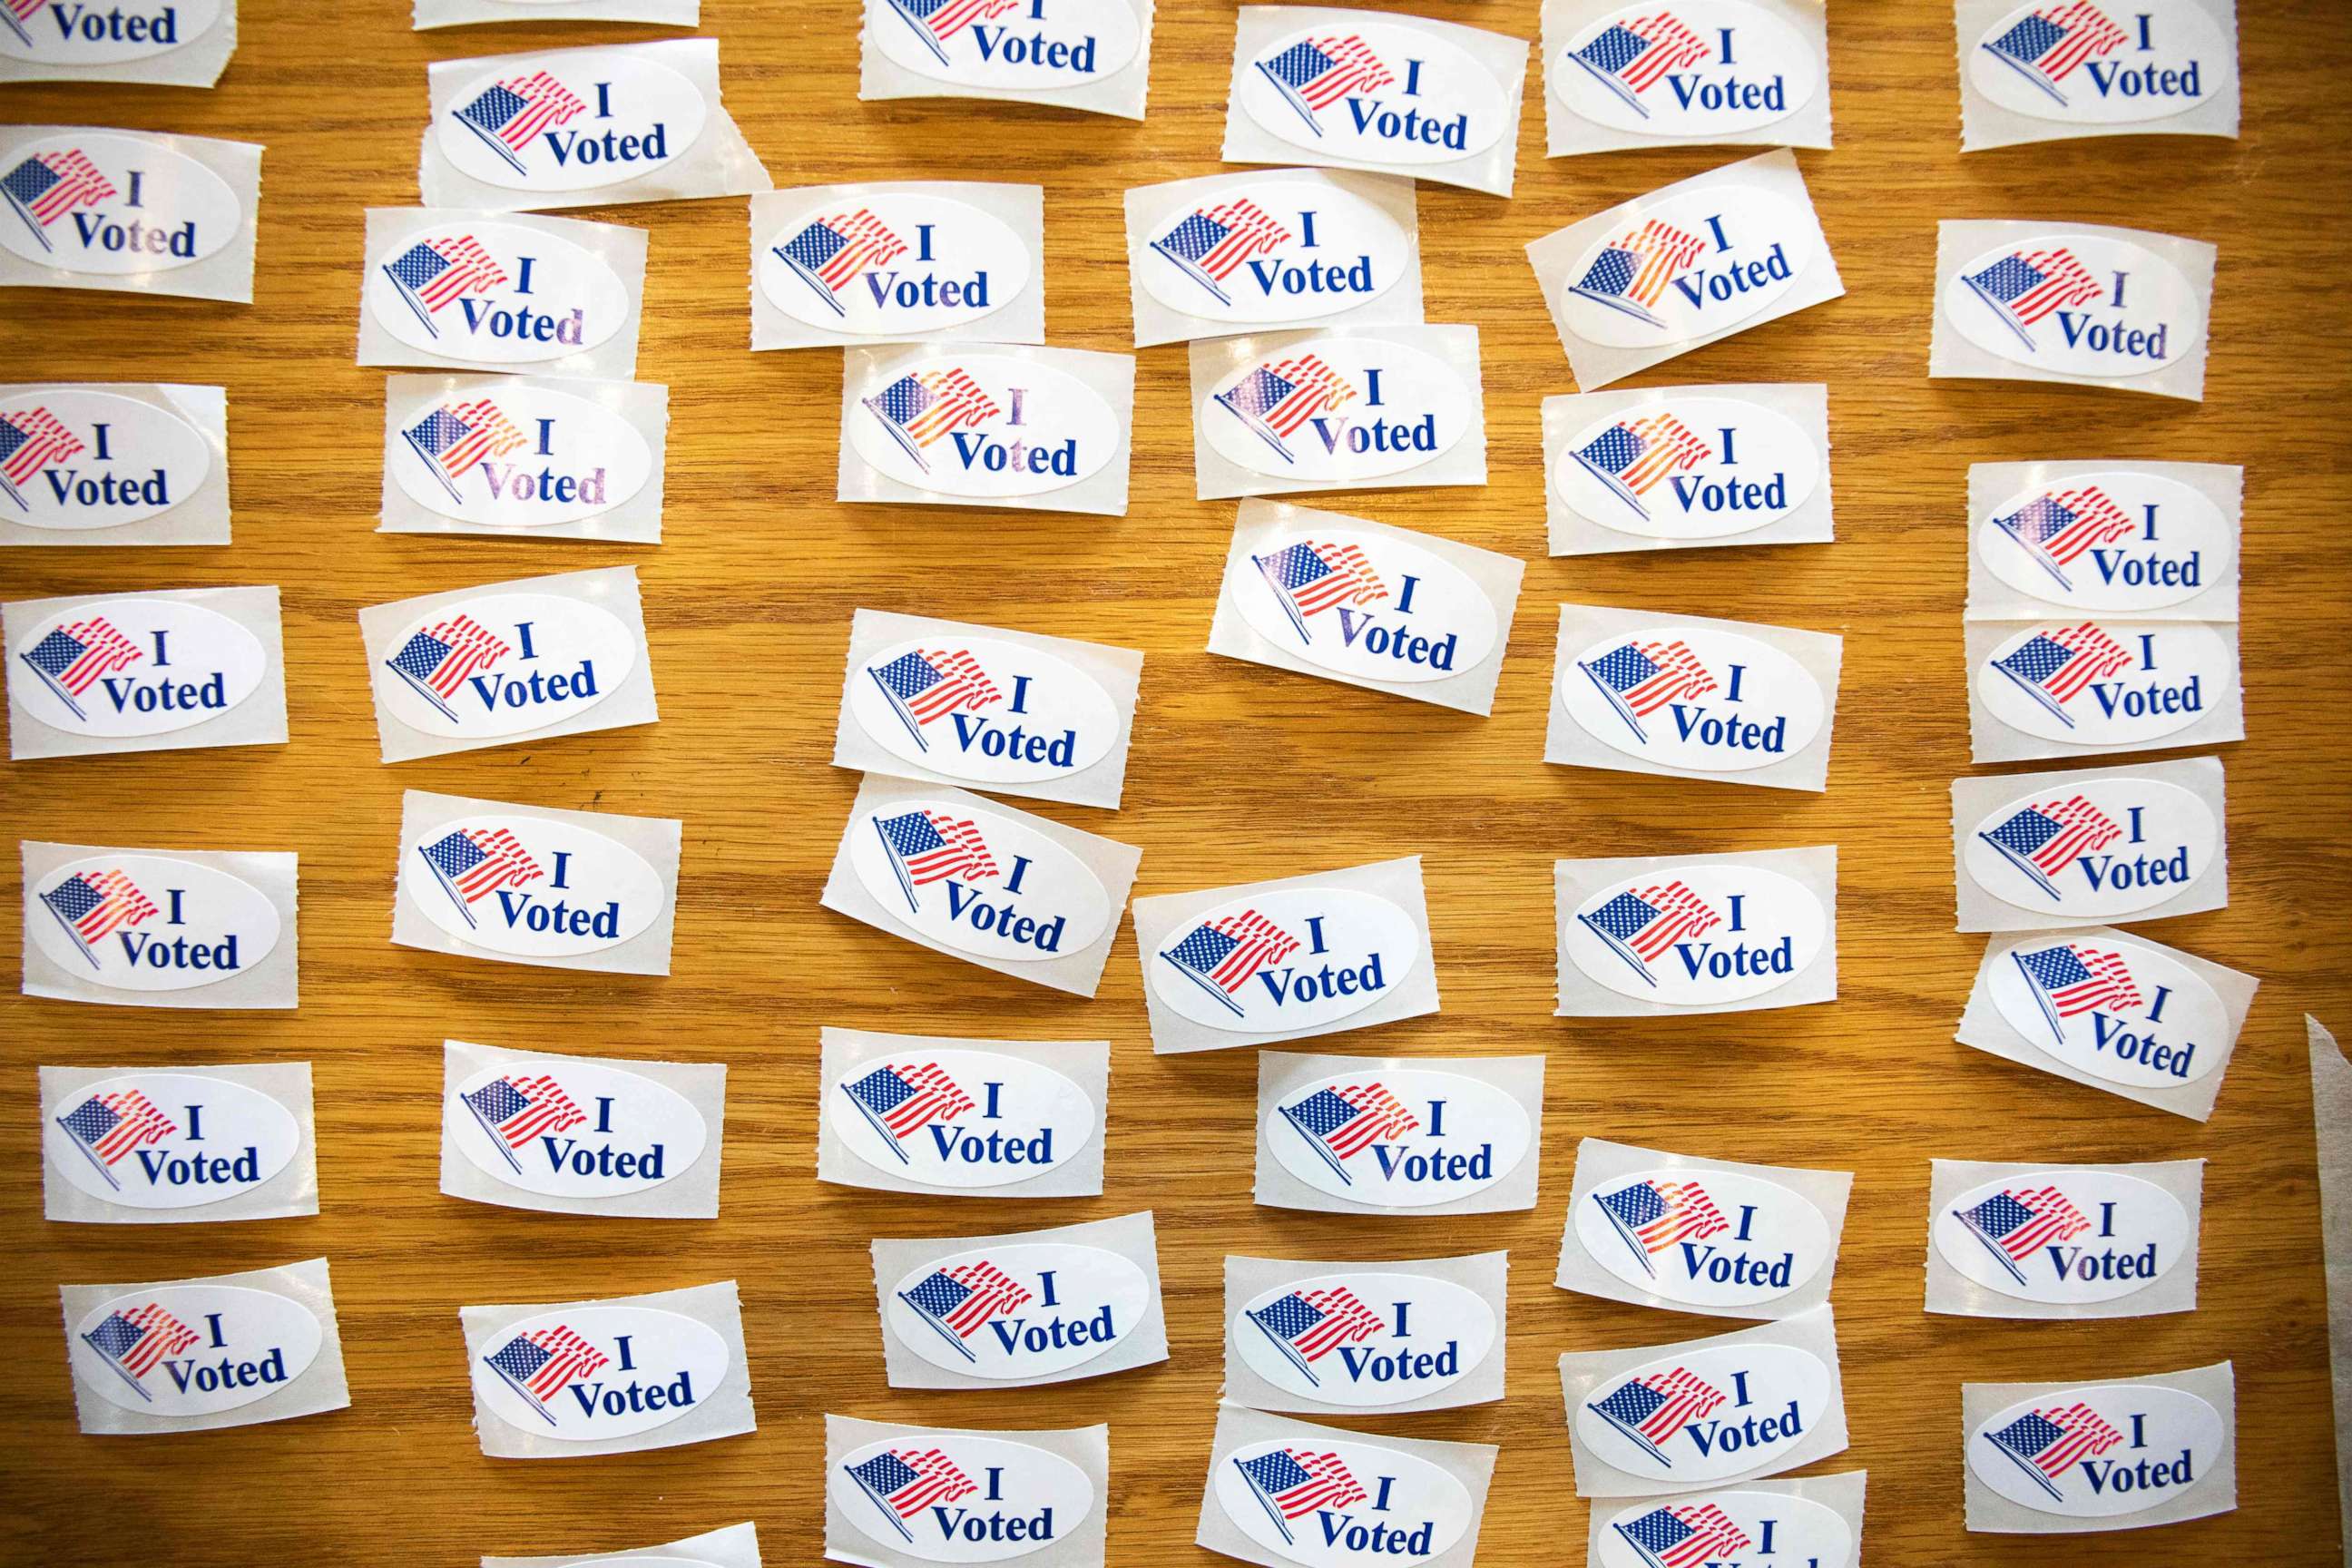 PHOTO: "I Voted" stickers cover a table at a polling station during the North Carolina primary on Super Tuesday in Charlotte, N.C. on March 3, 2020.